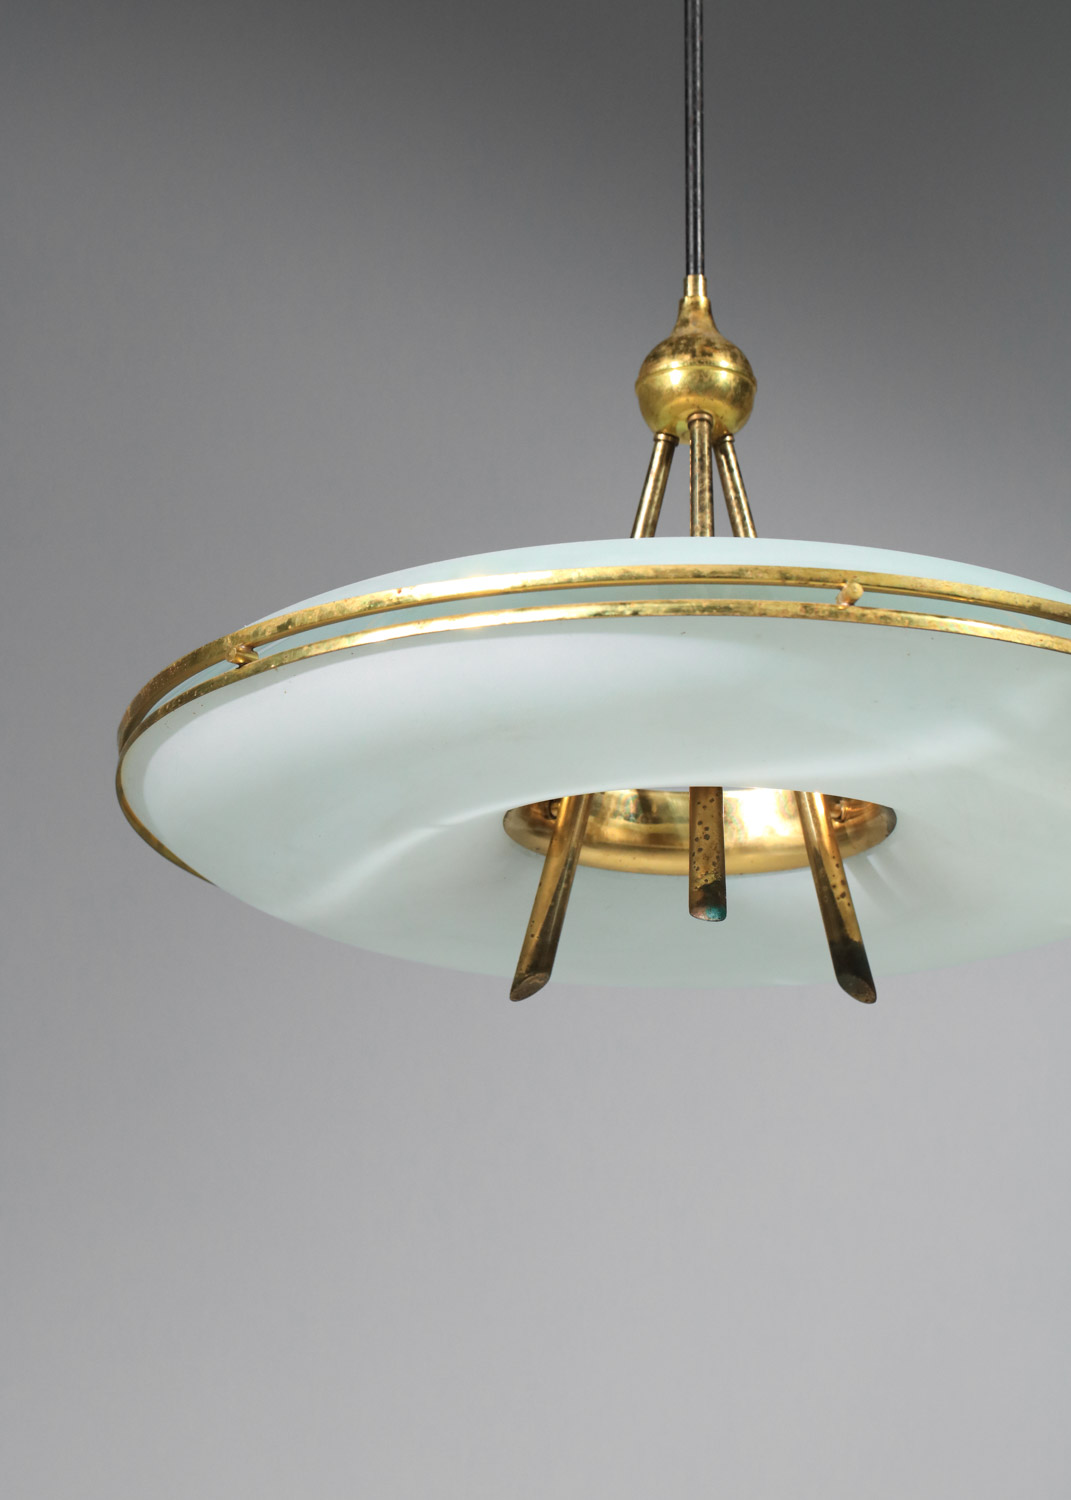 Italian pendant chandelier in the style of pietro chiesa glass and ...